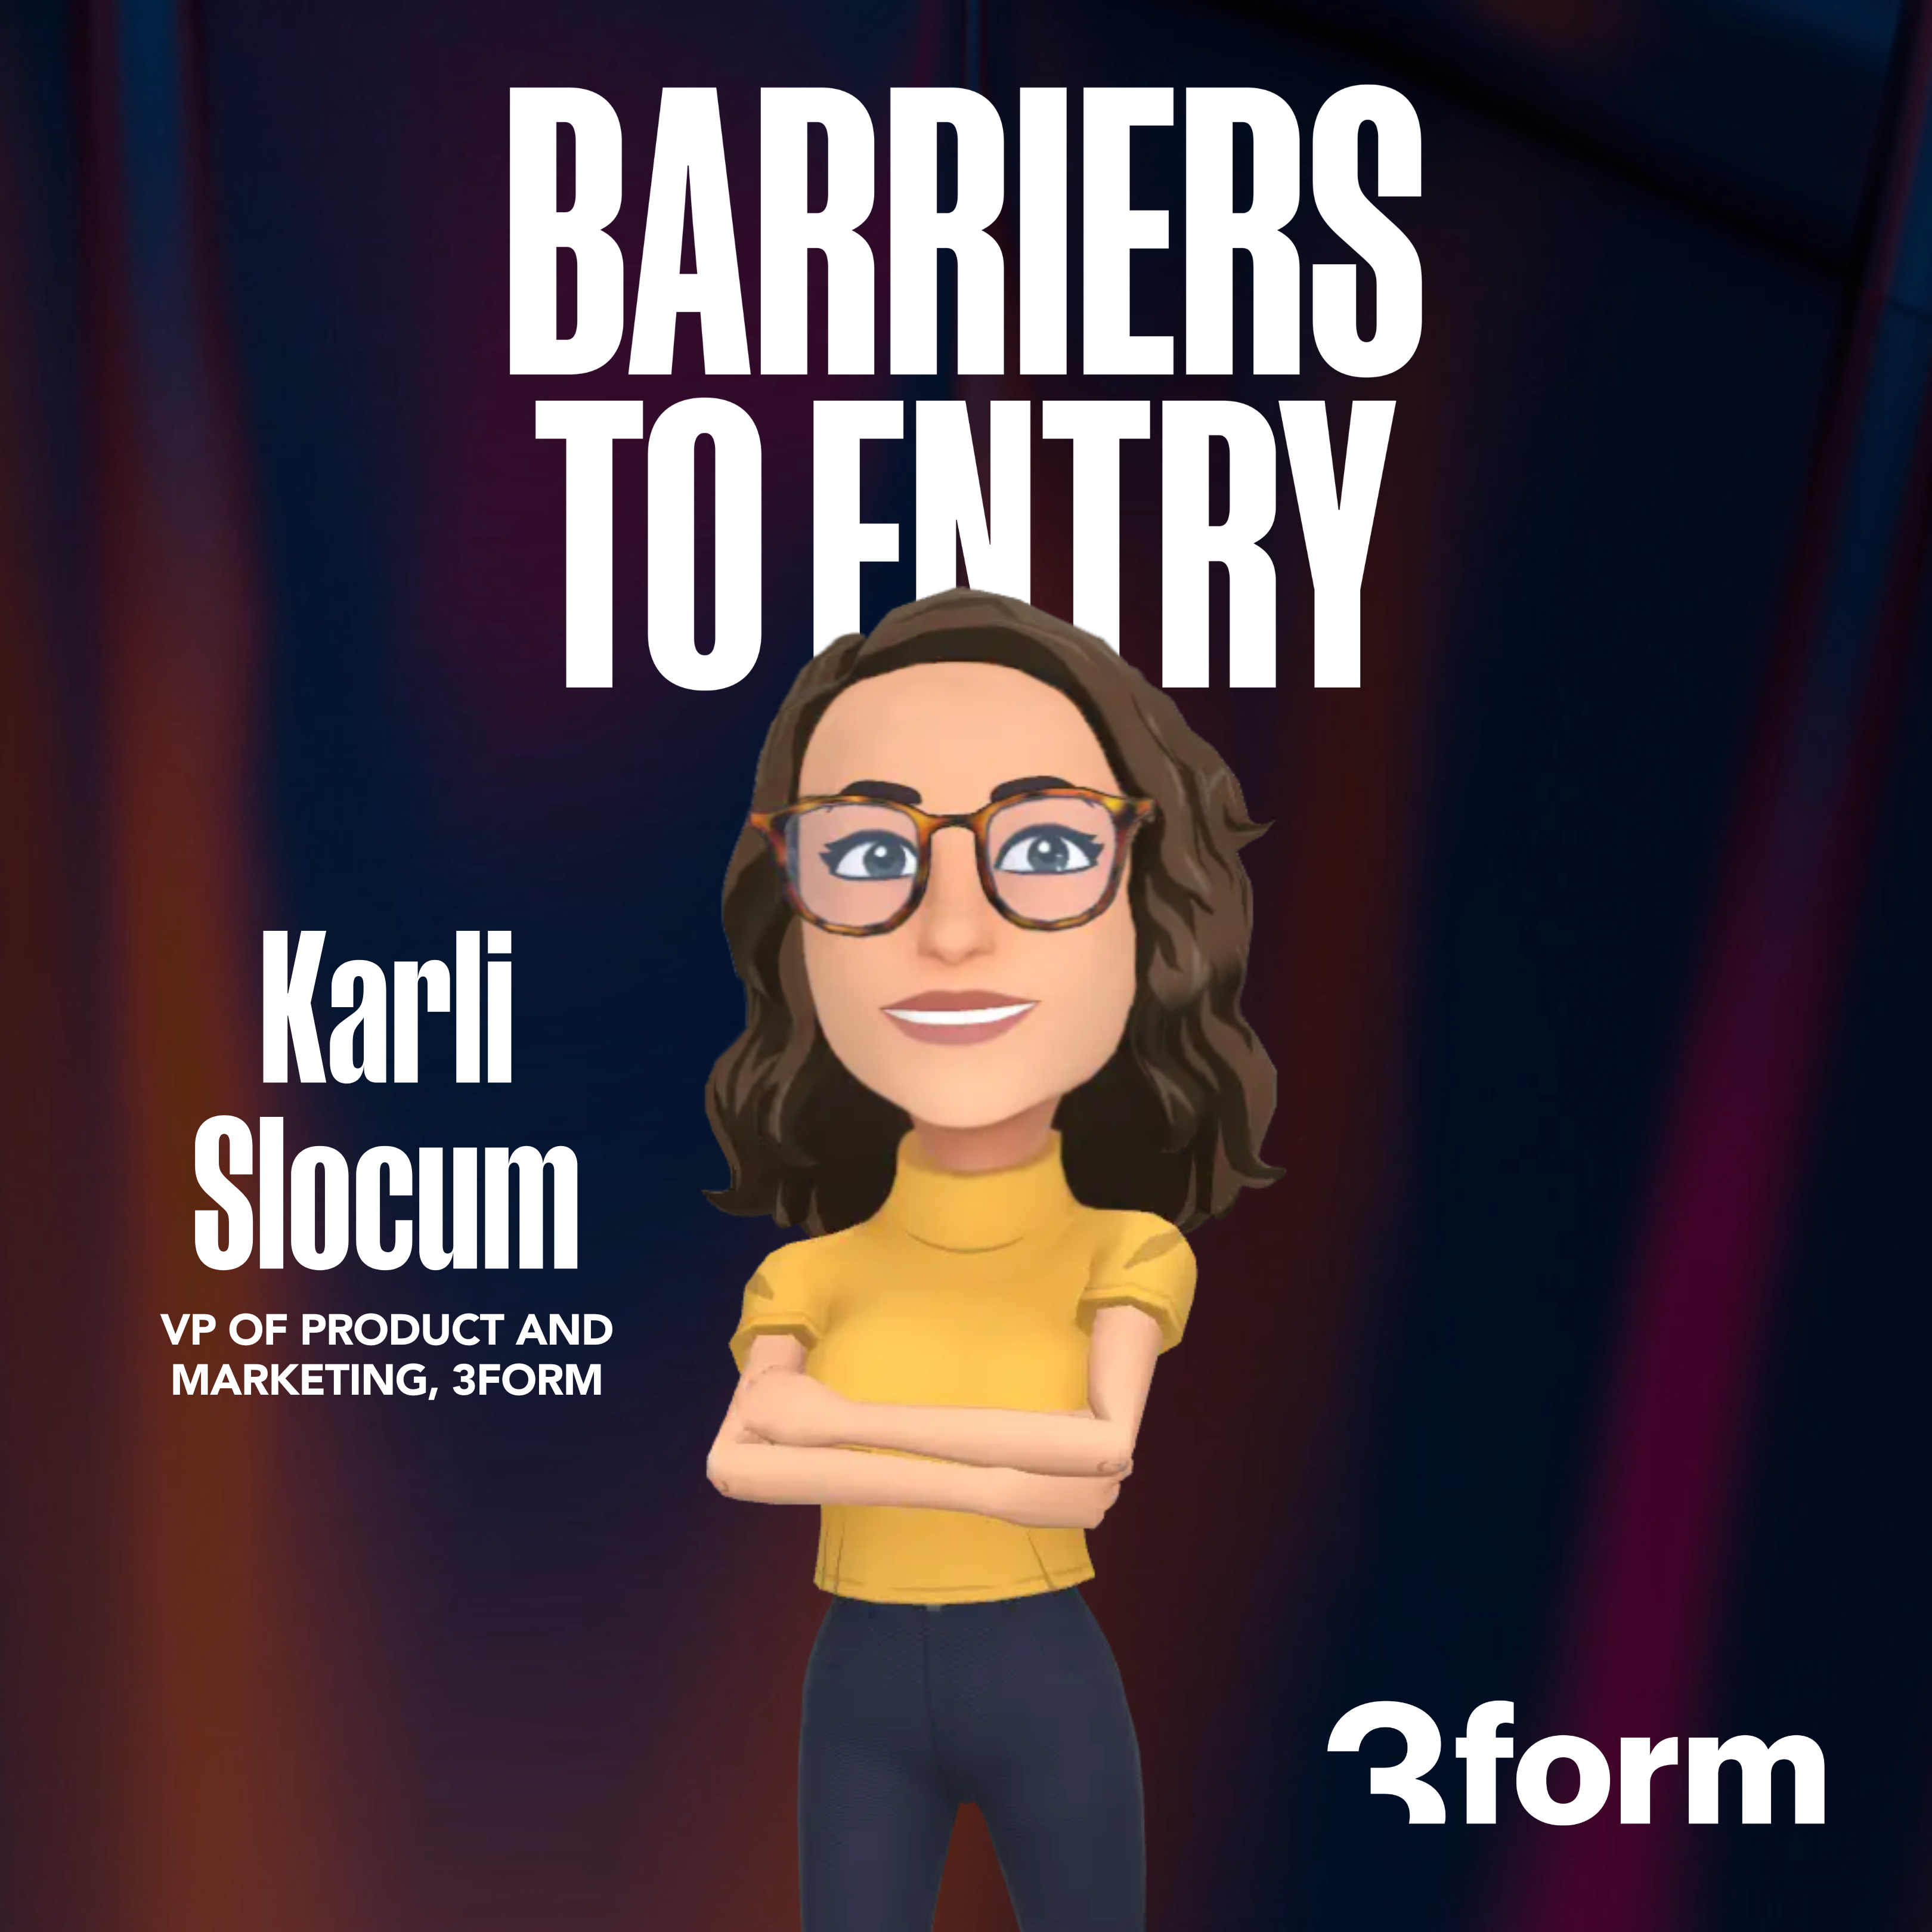 Karli Slocum on the cover of the Barriers to Entry podcast episode artwork cover